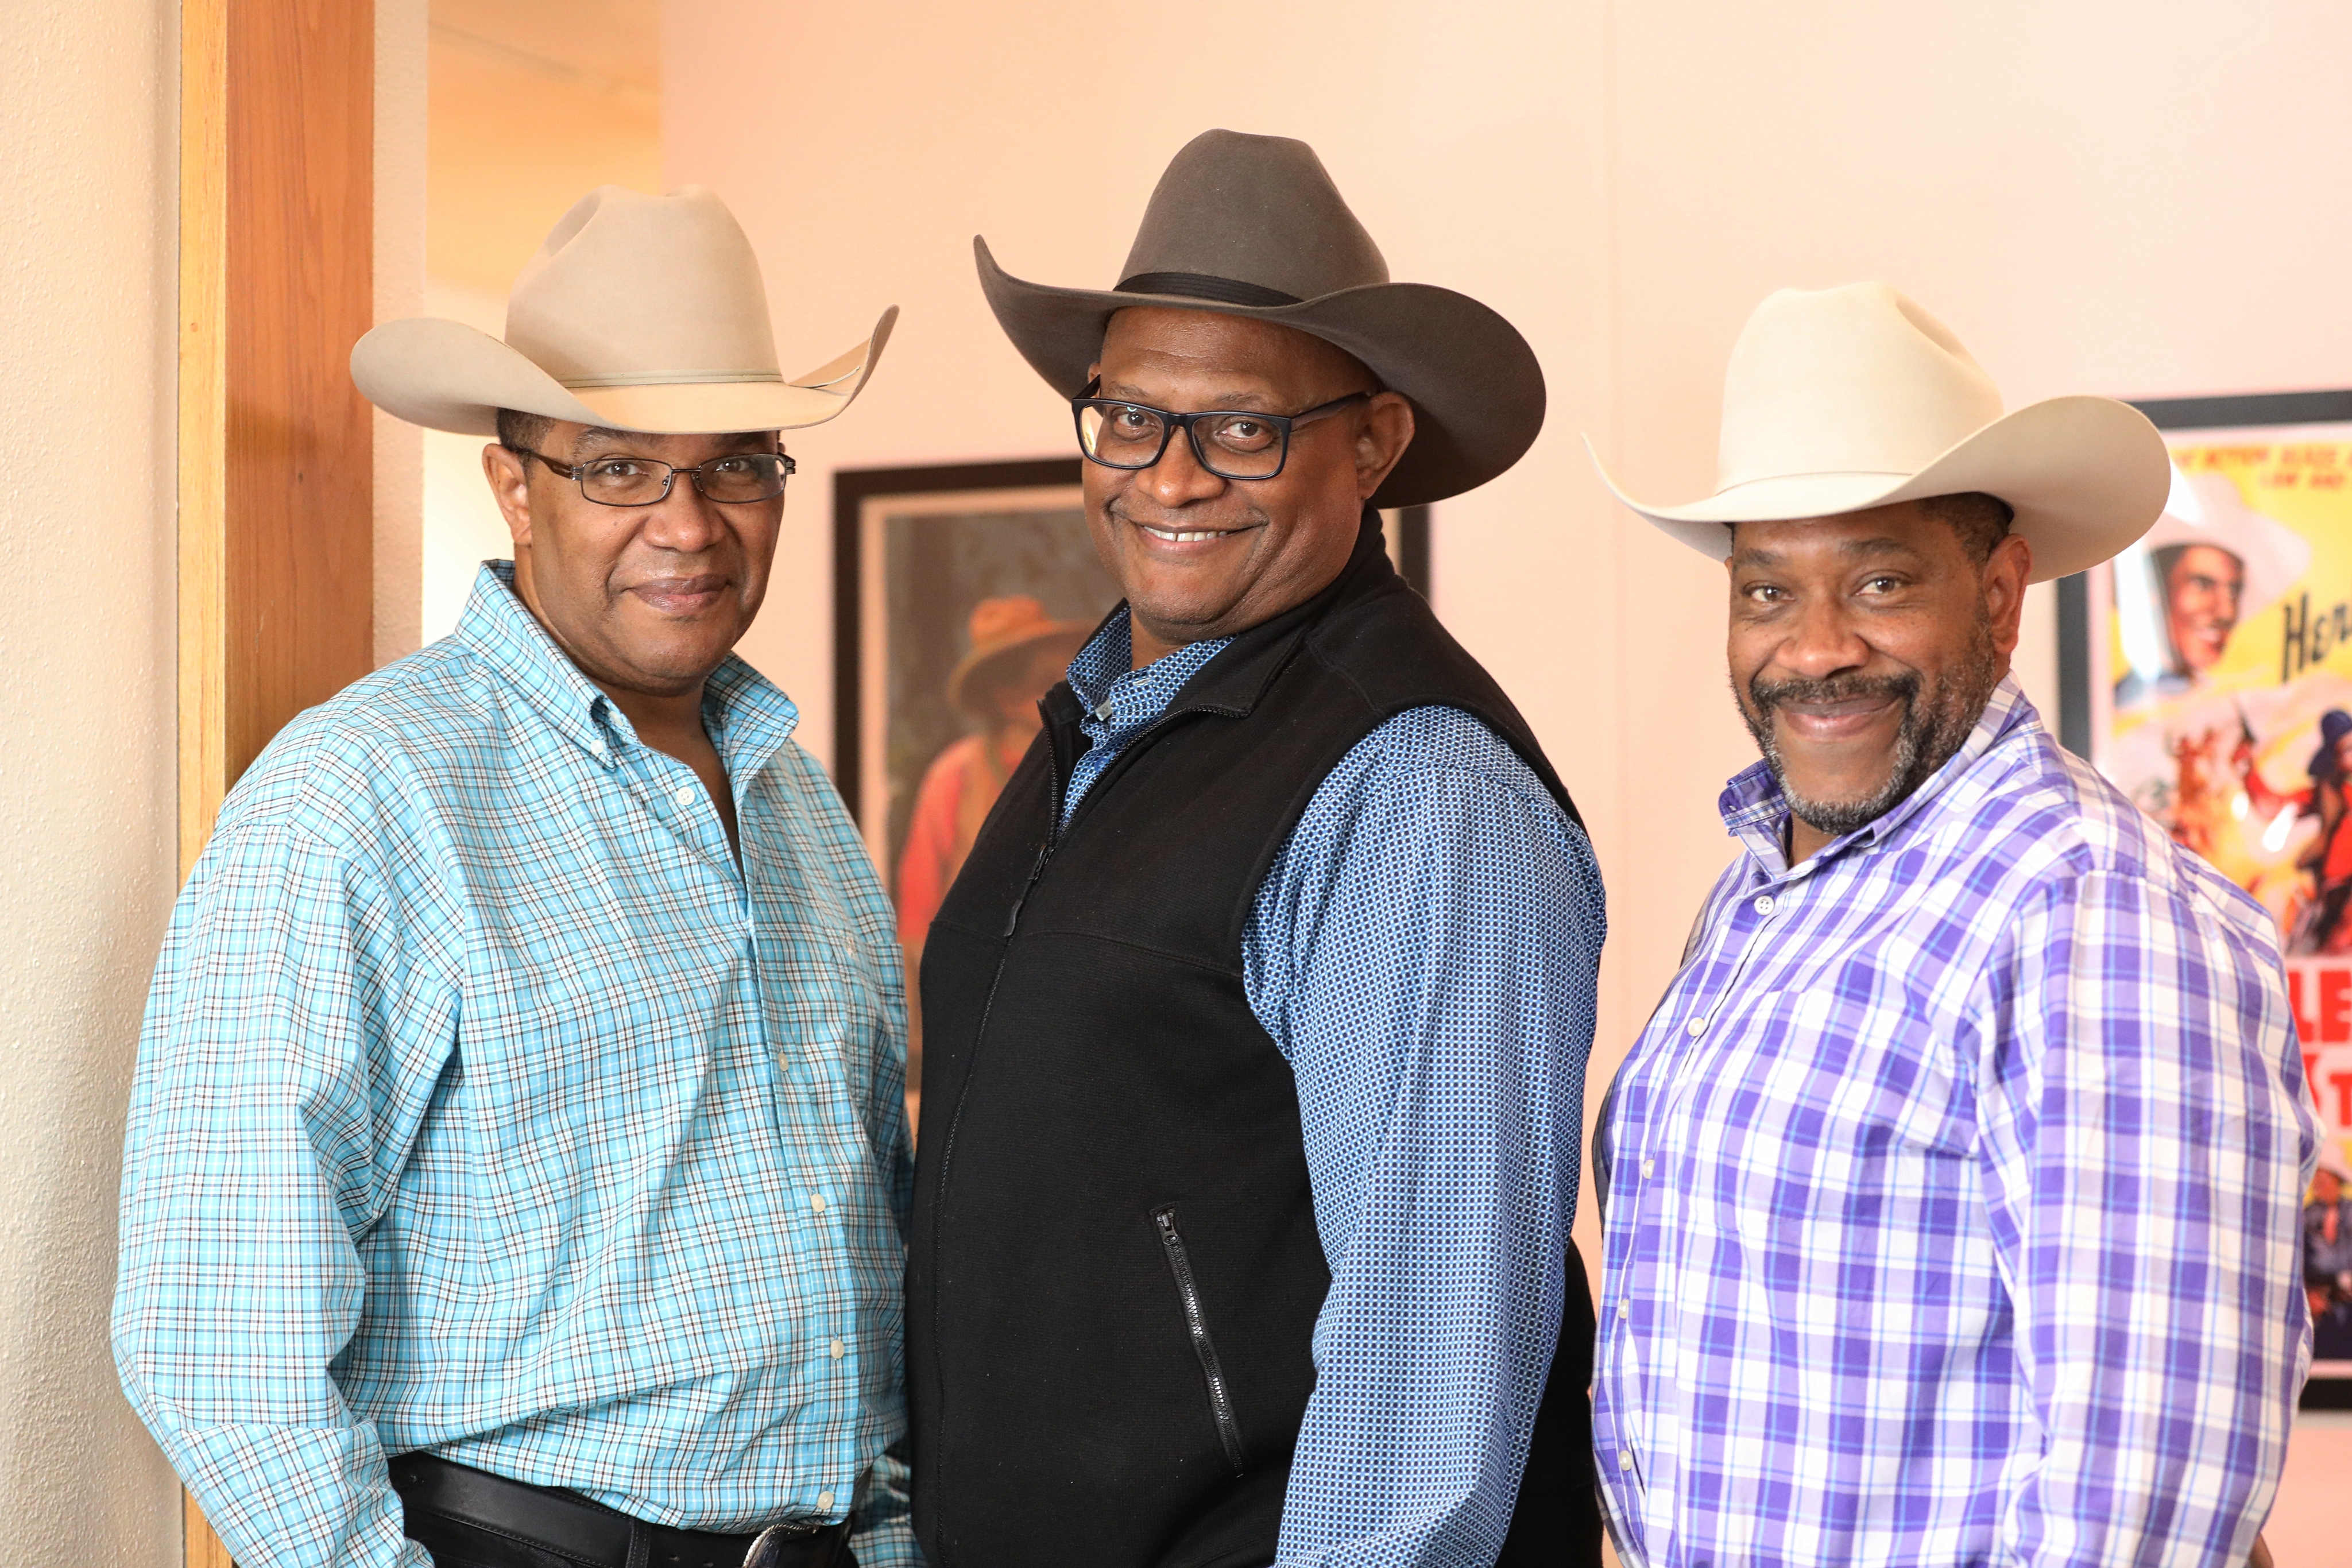 Black cowboys exhibit rich with history, helps tell untold stories